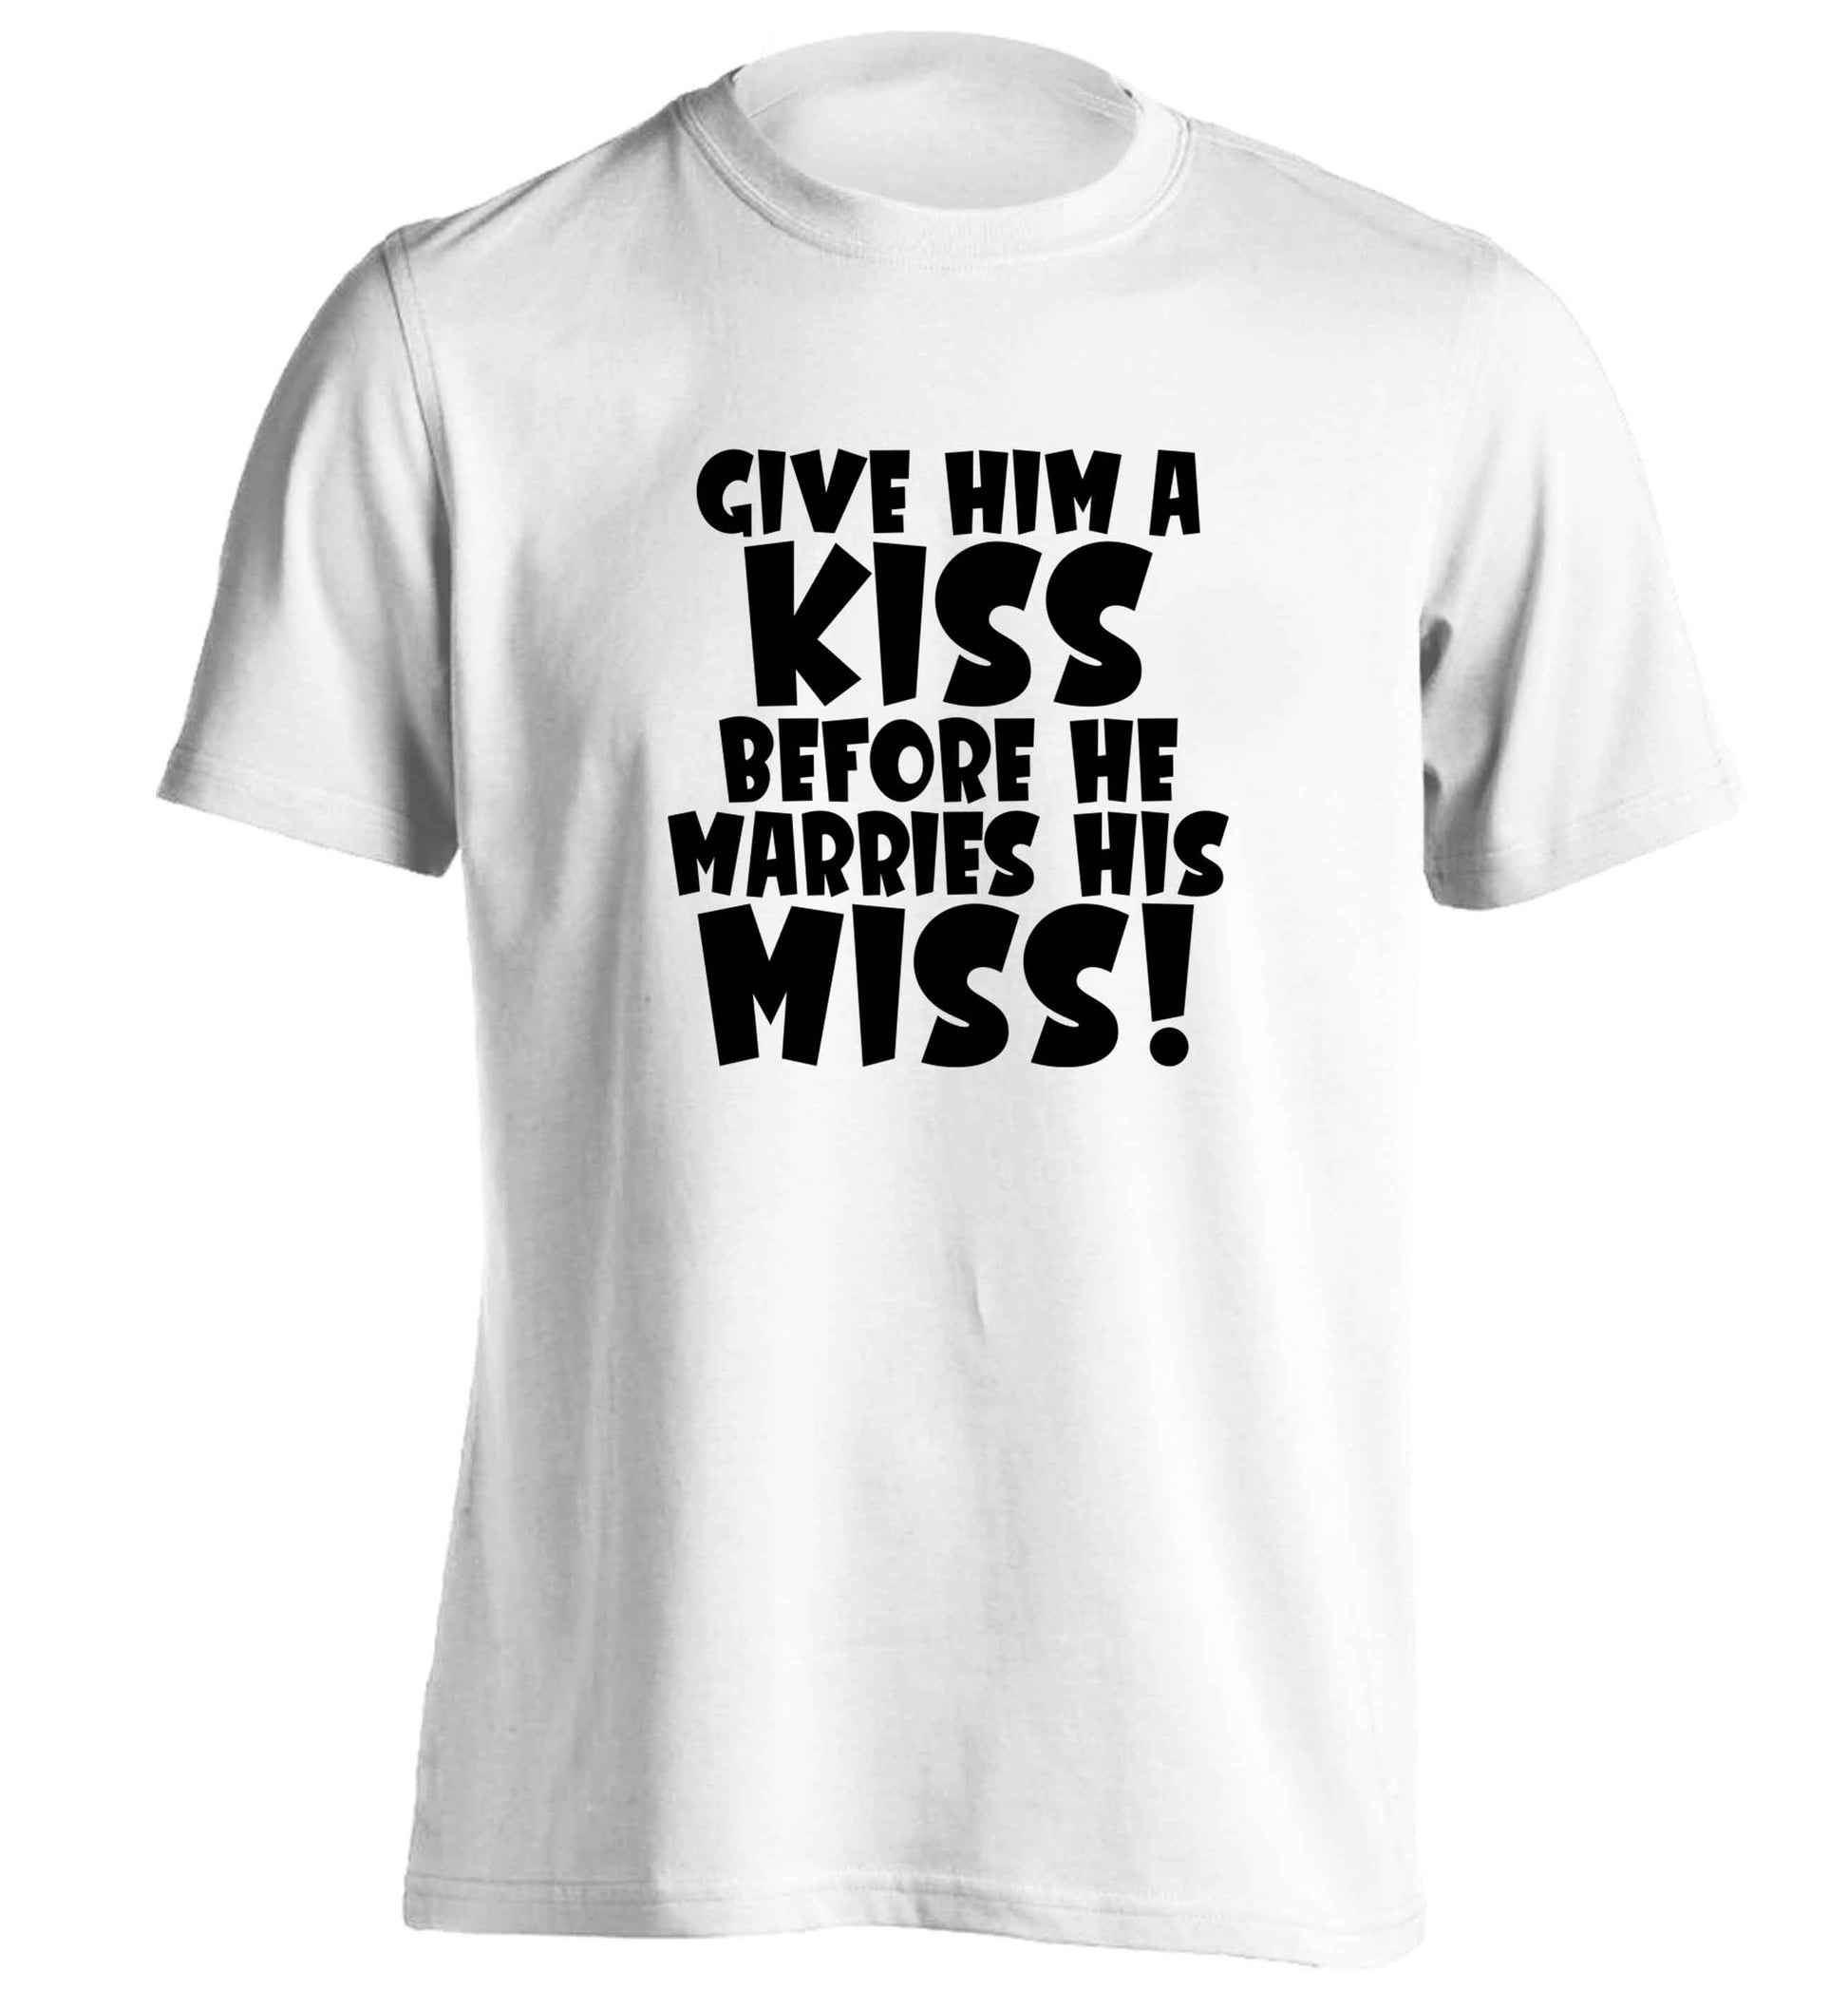 Give him a kiss before he marries his miss adults unisex white Tshirt 2XL